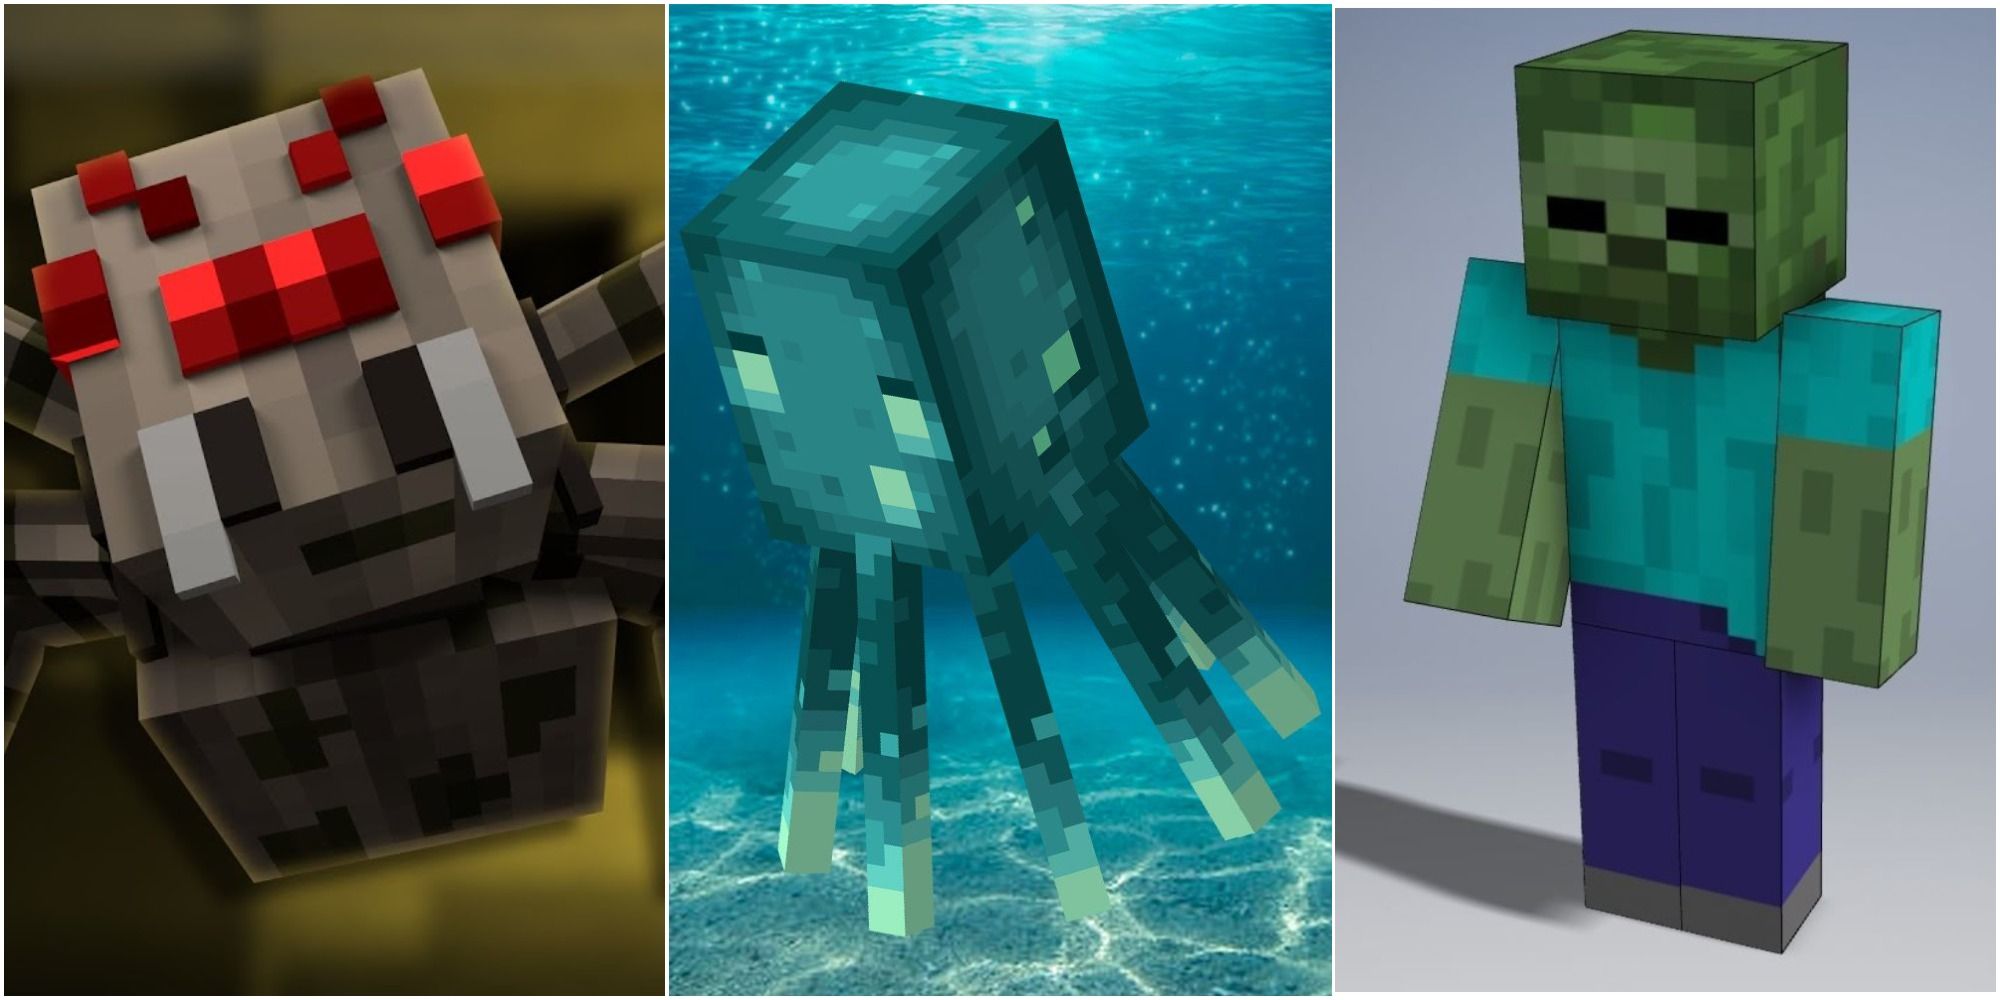 What Minecraft Mob Are You Based On Your Zodiac